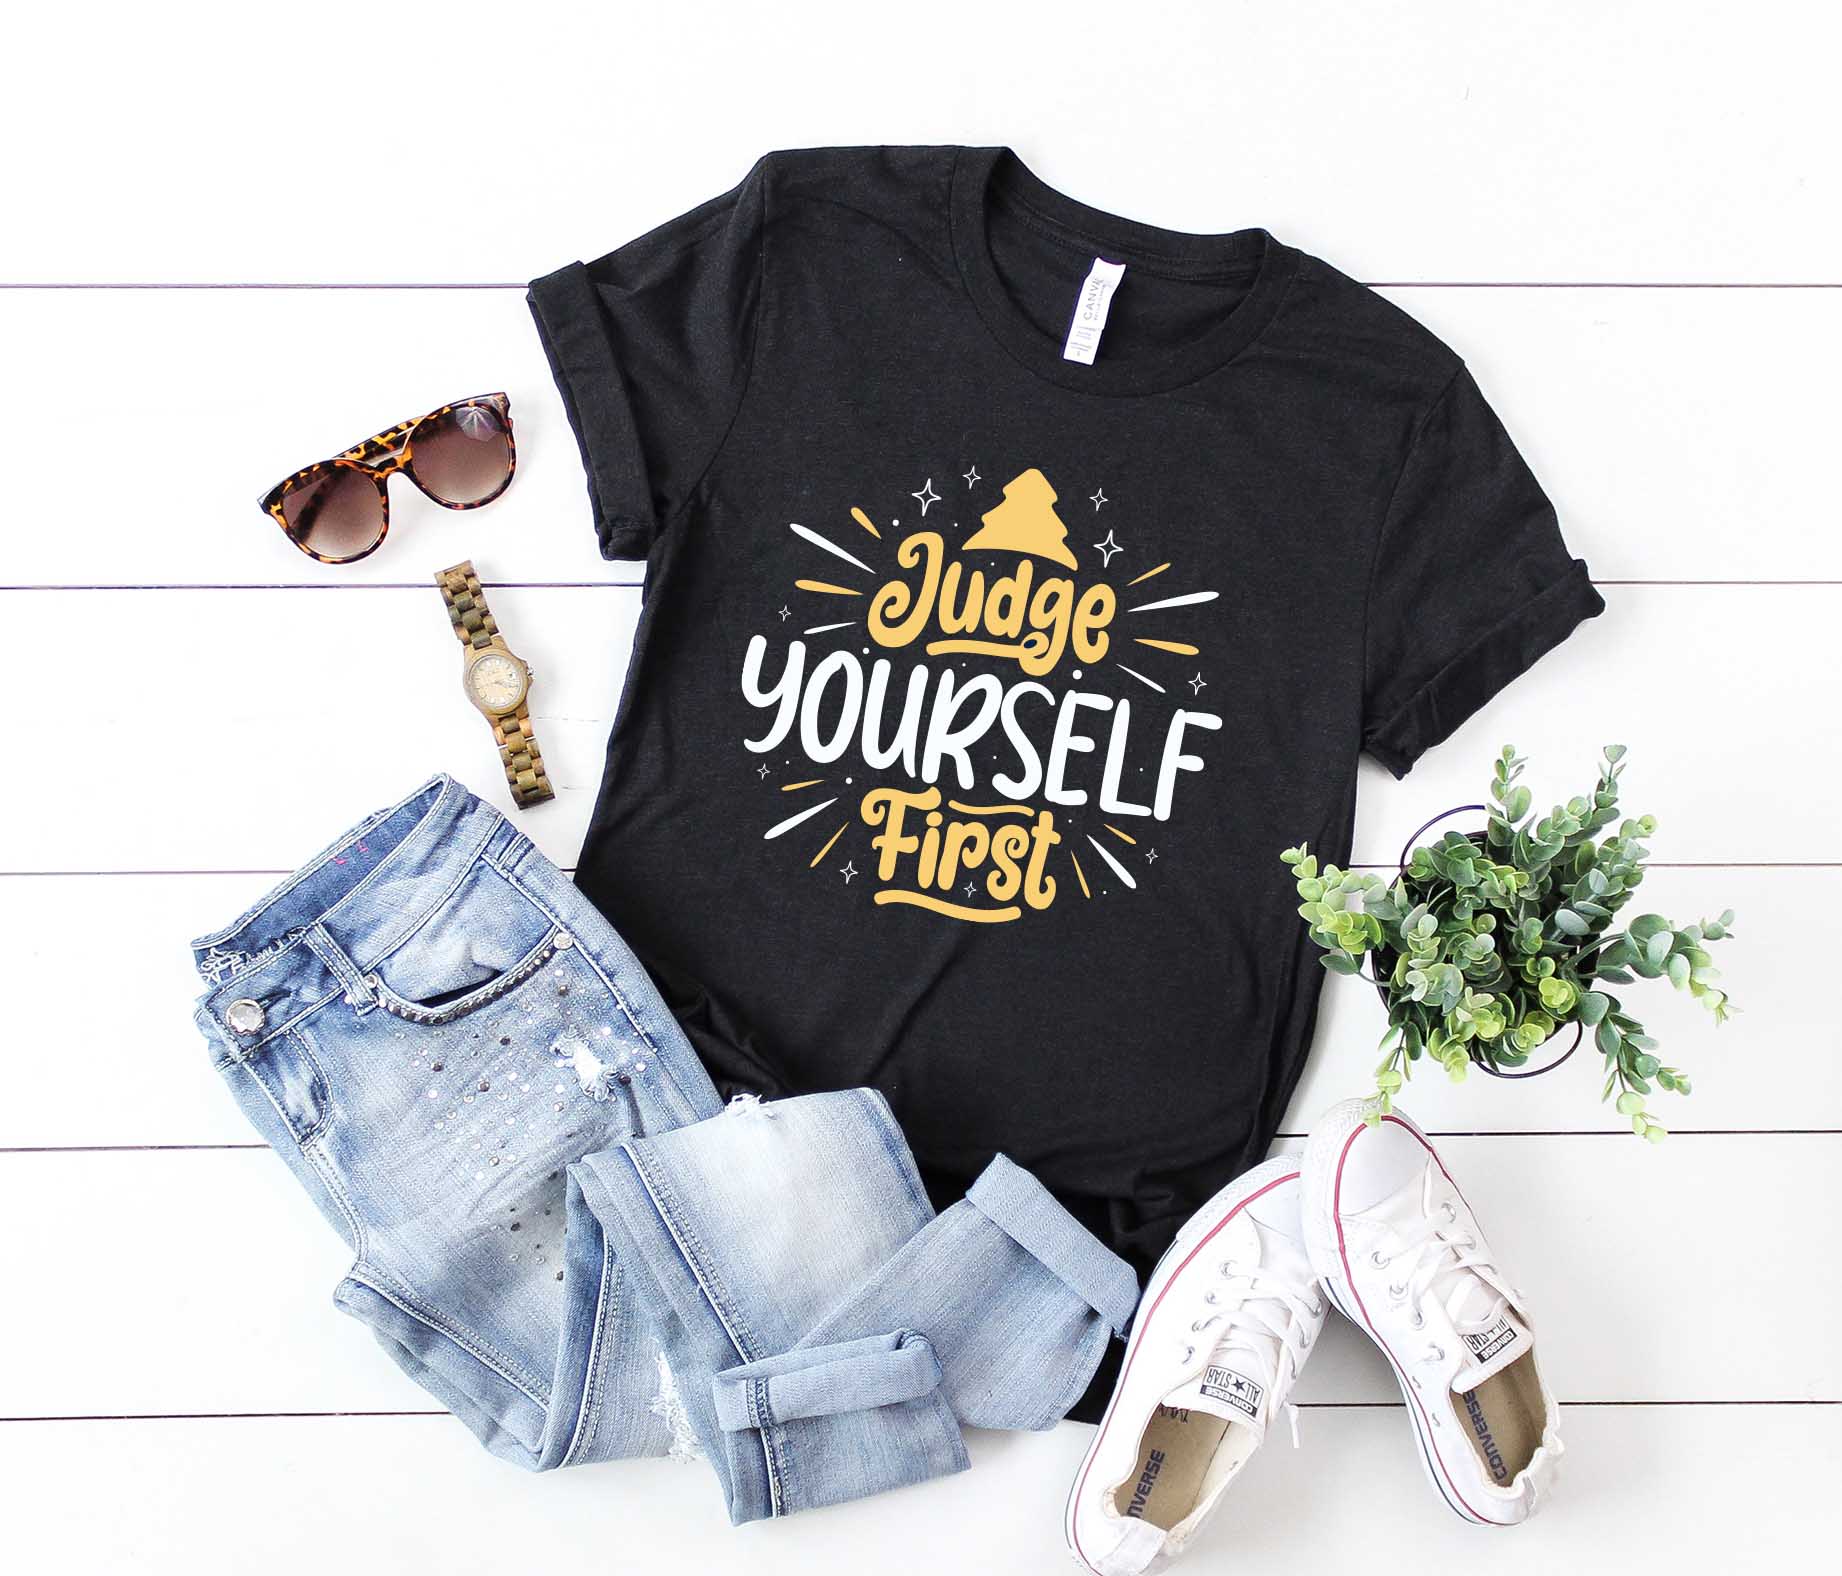 T - shirt that says judge yourself first next to a pair of jeans and.